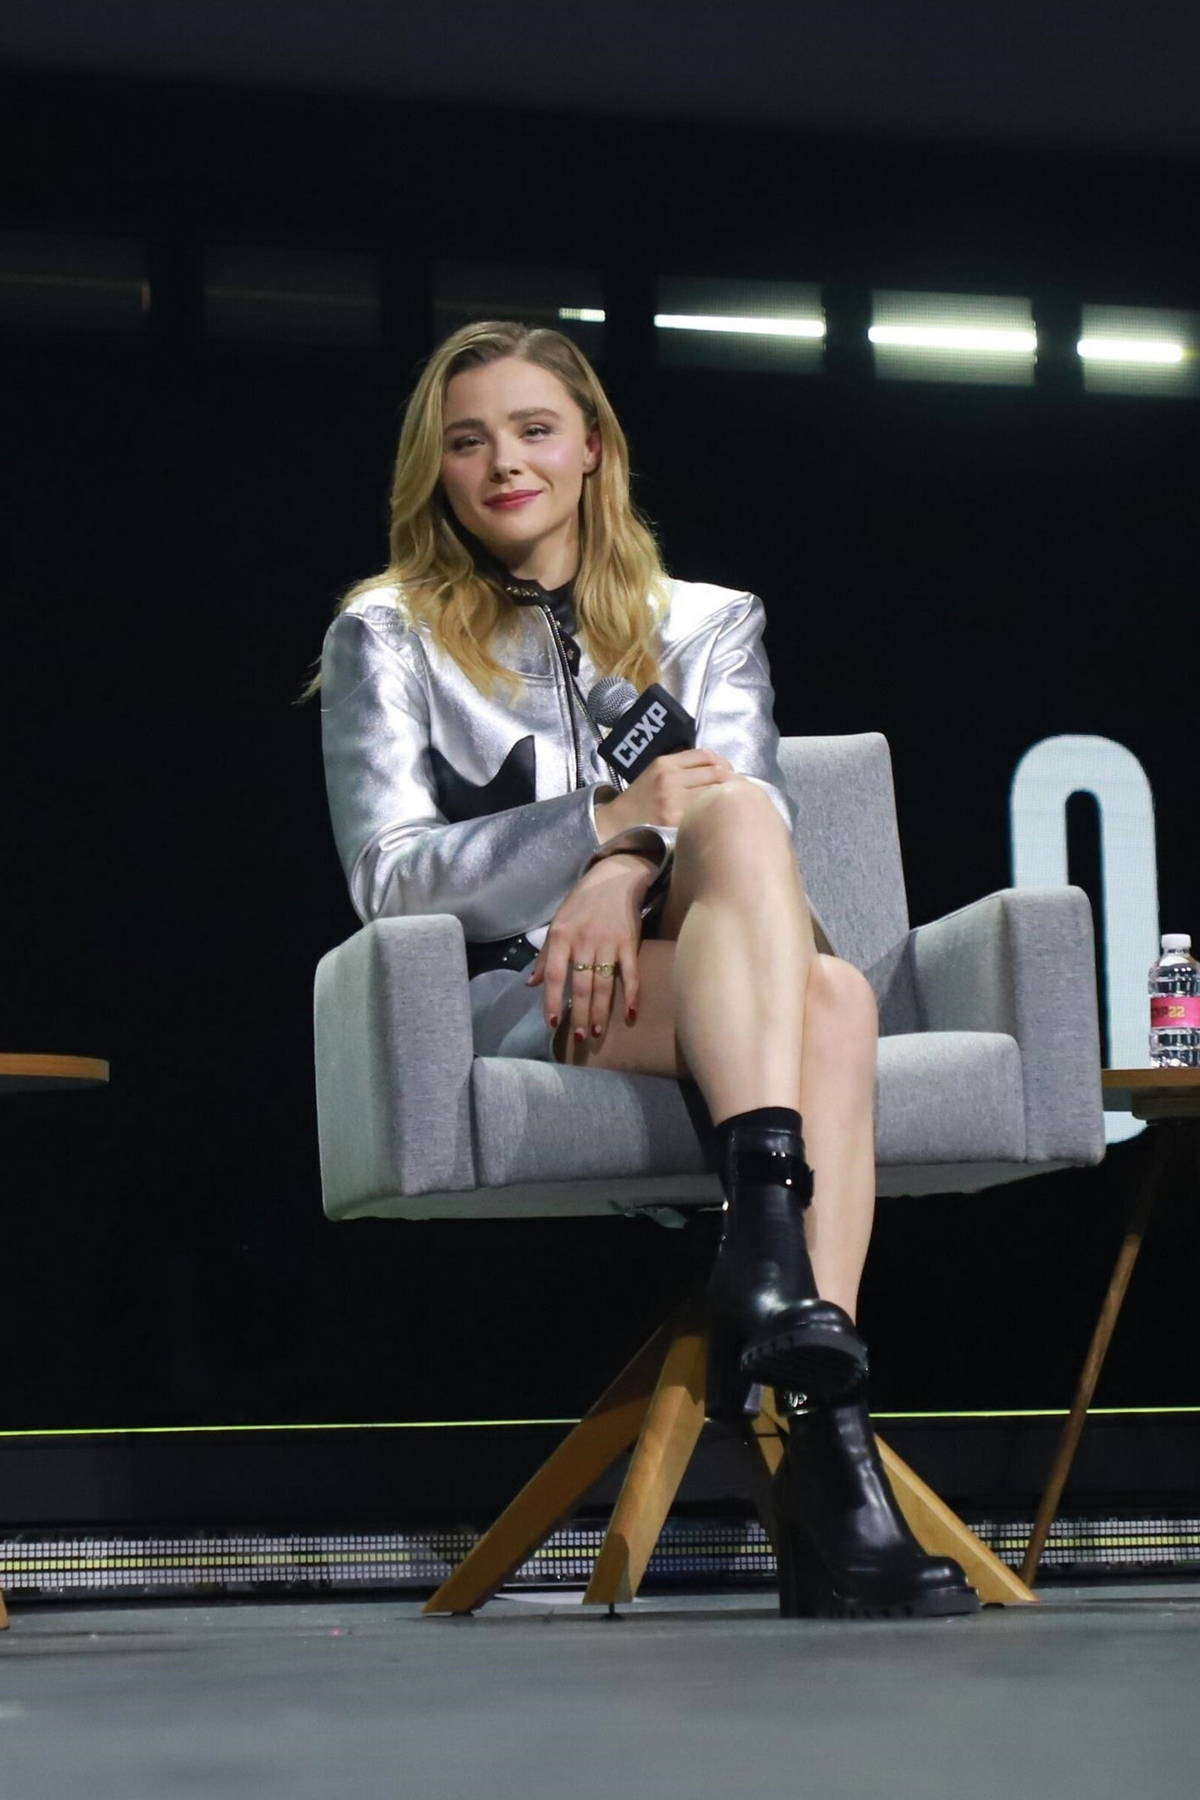 Chloe Grace Moretz speaks on stage during CCXP 2022 in Sao Paulo, Brazil